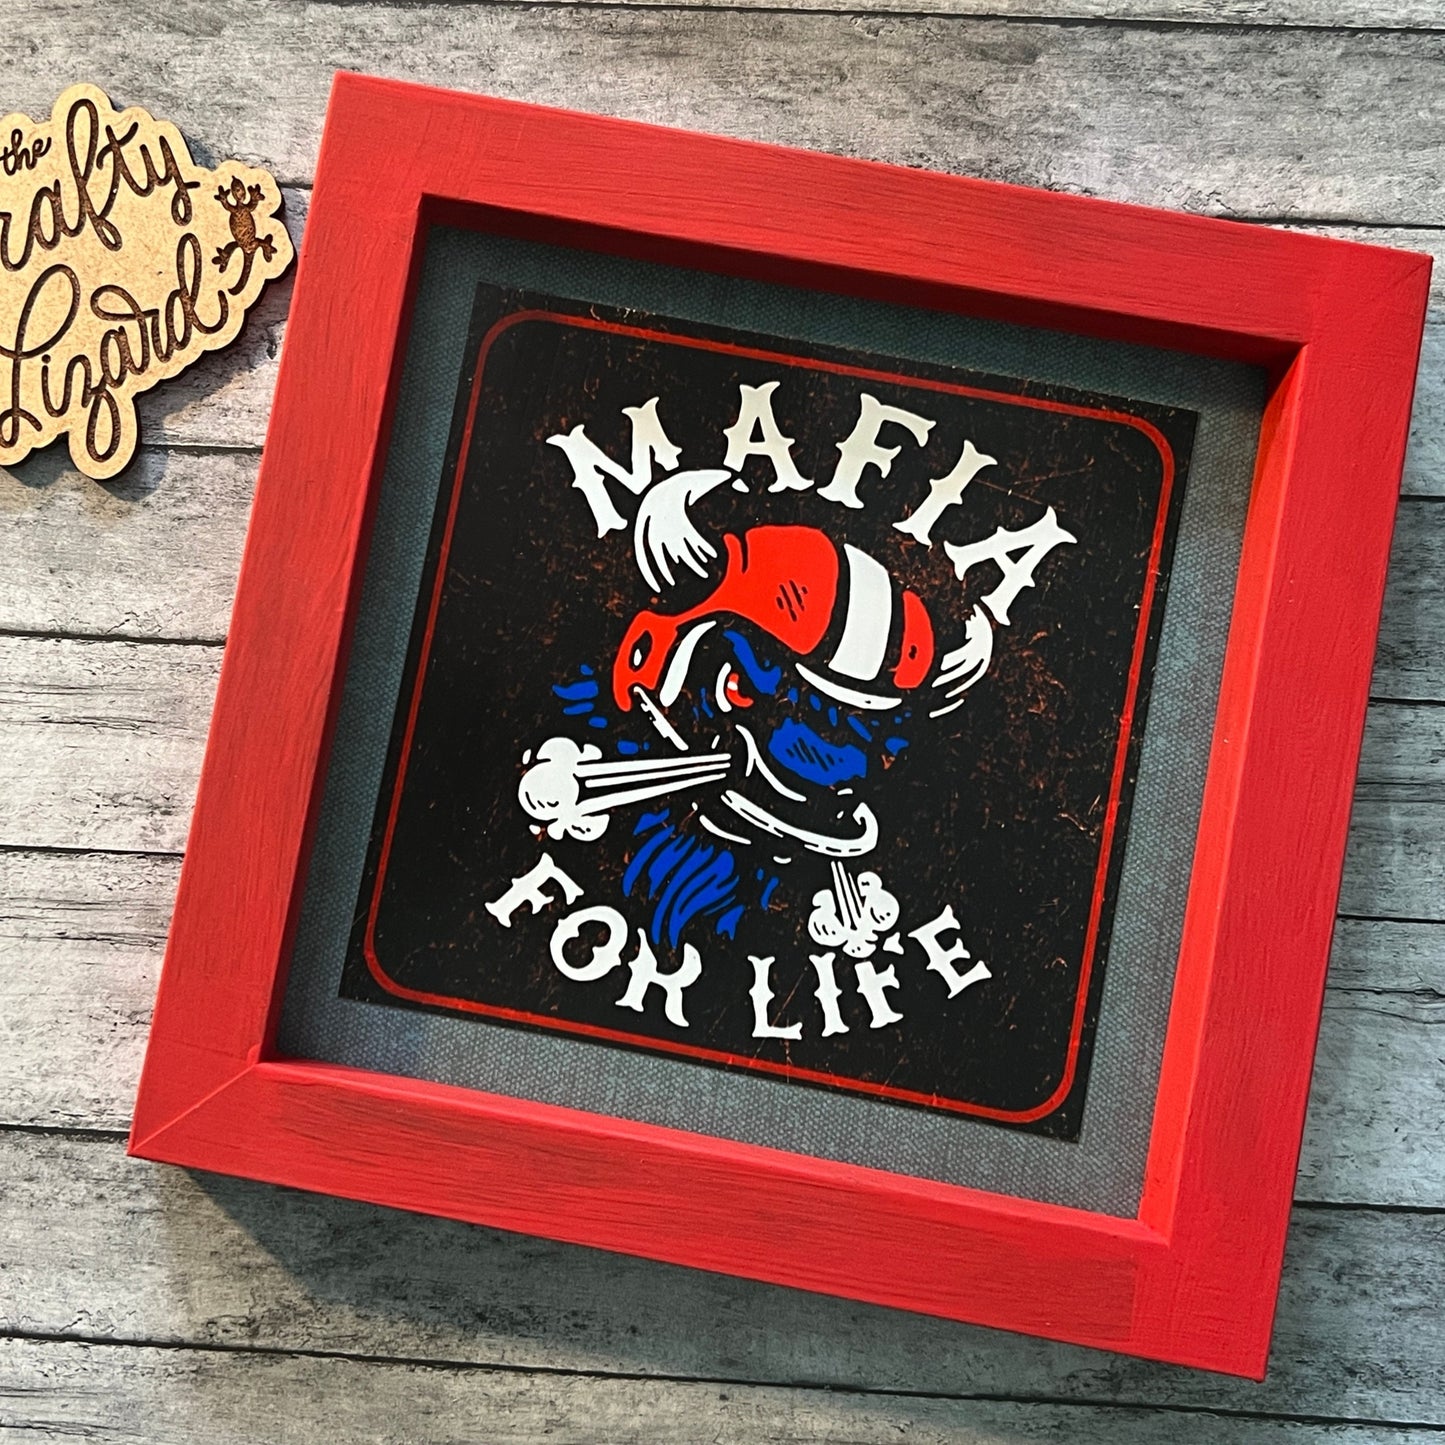 Square red frame with no glass. Denim blue paper background with illustration of an angry blue Buffalo head wearing a red and white football helmet. Says “Mafia for life”.